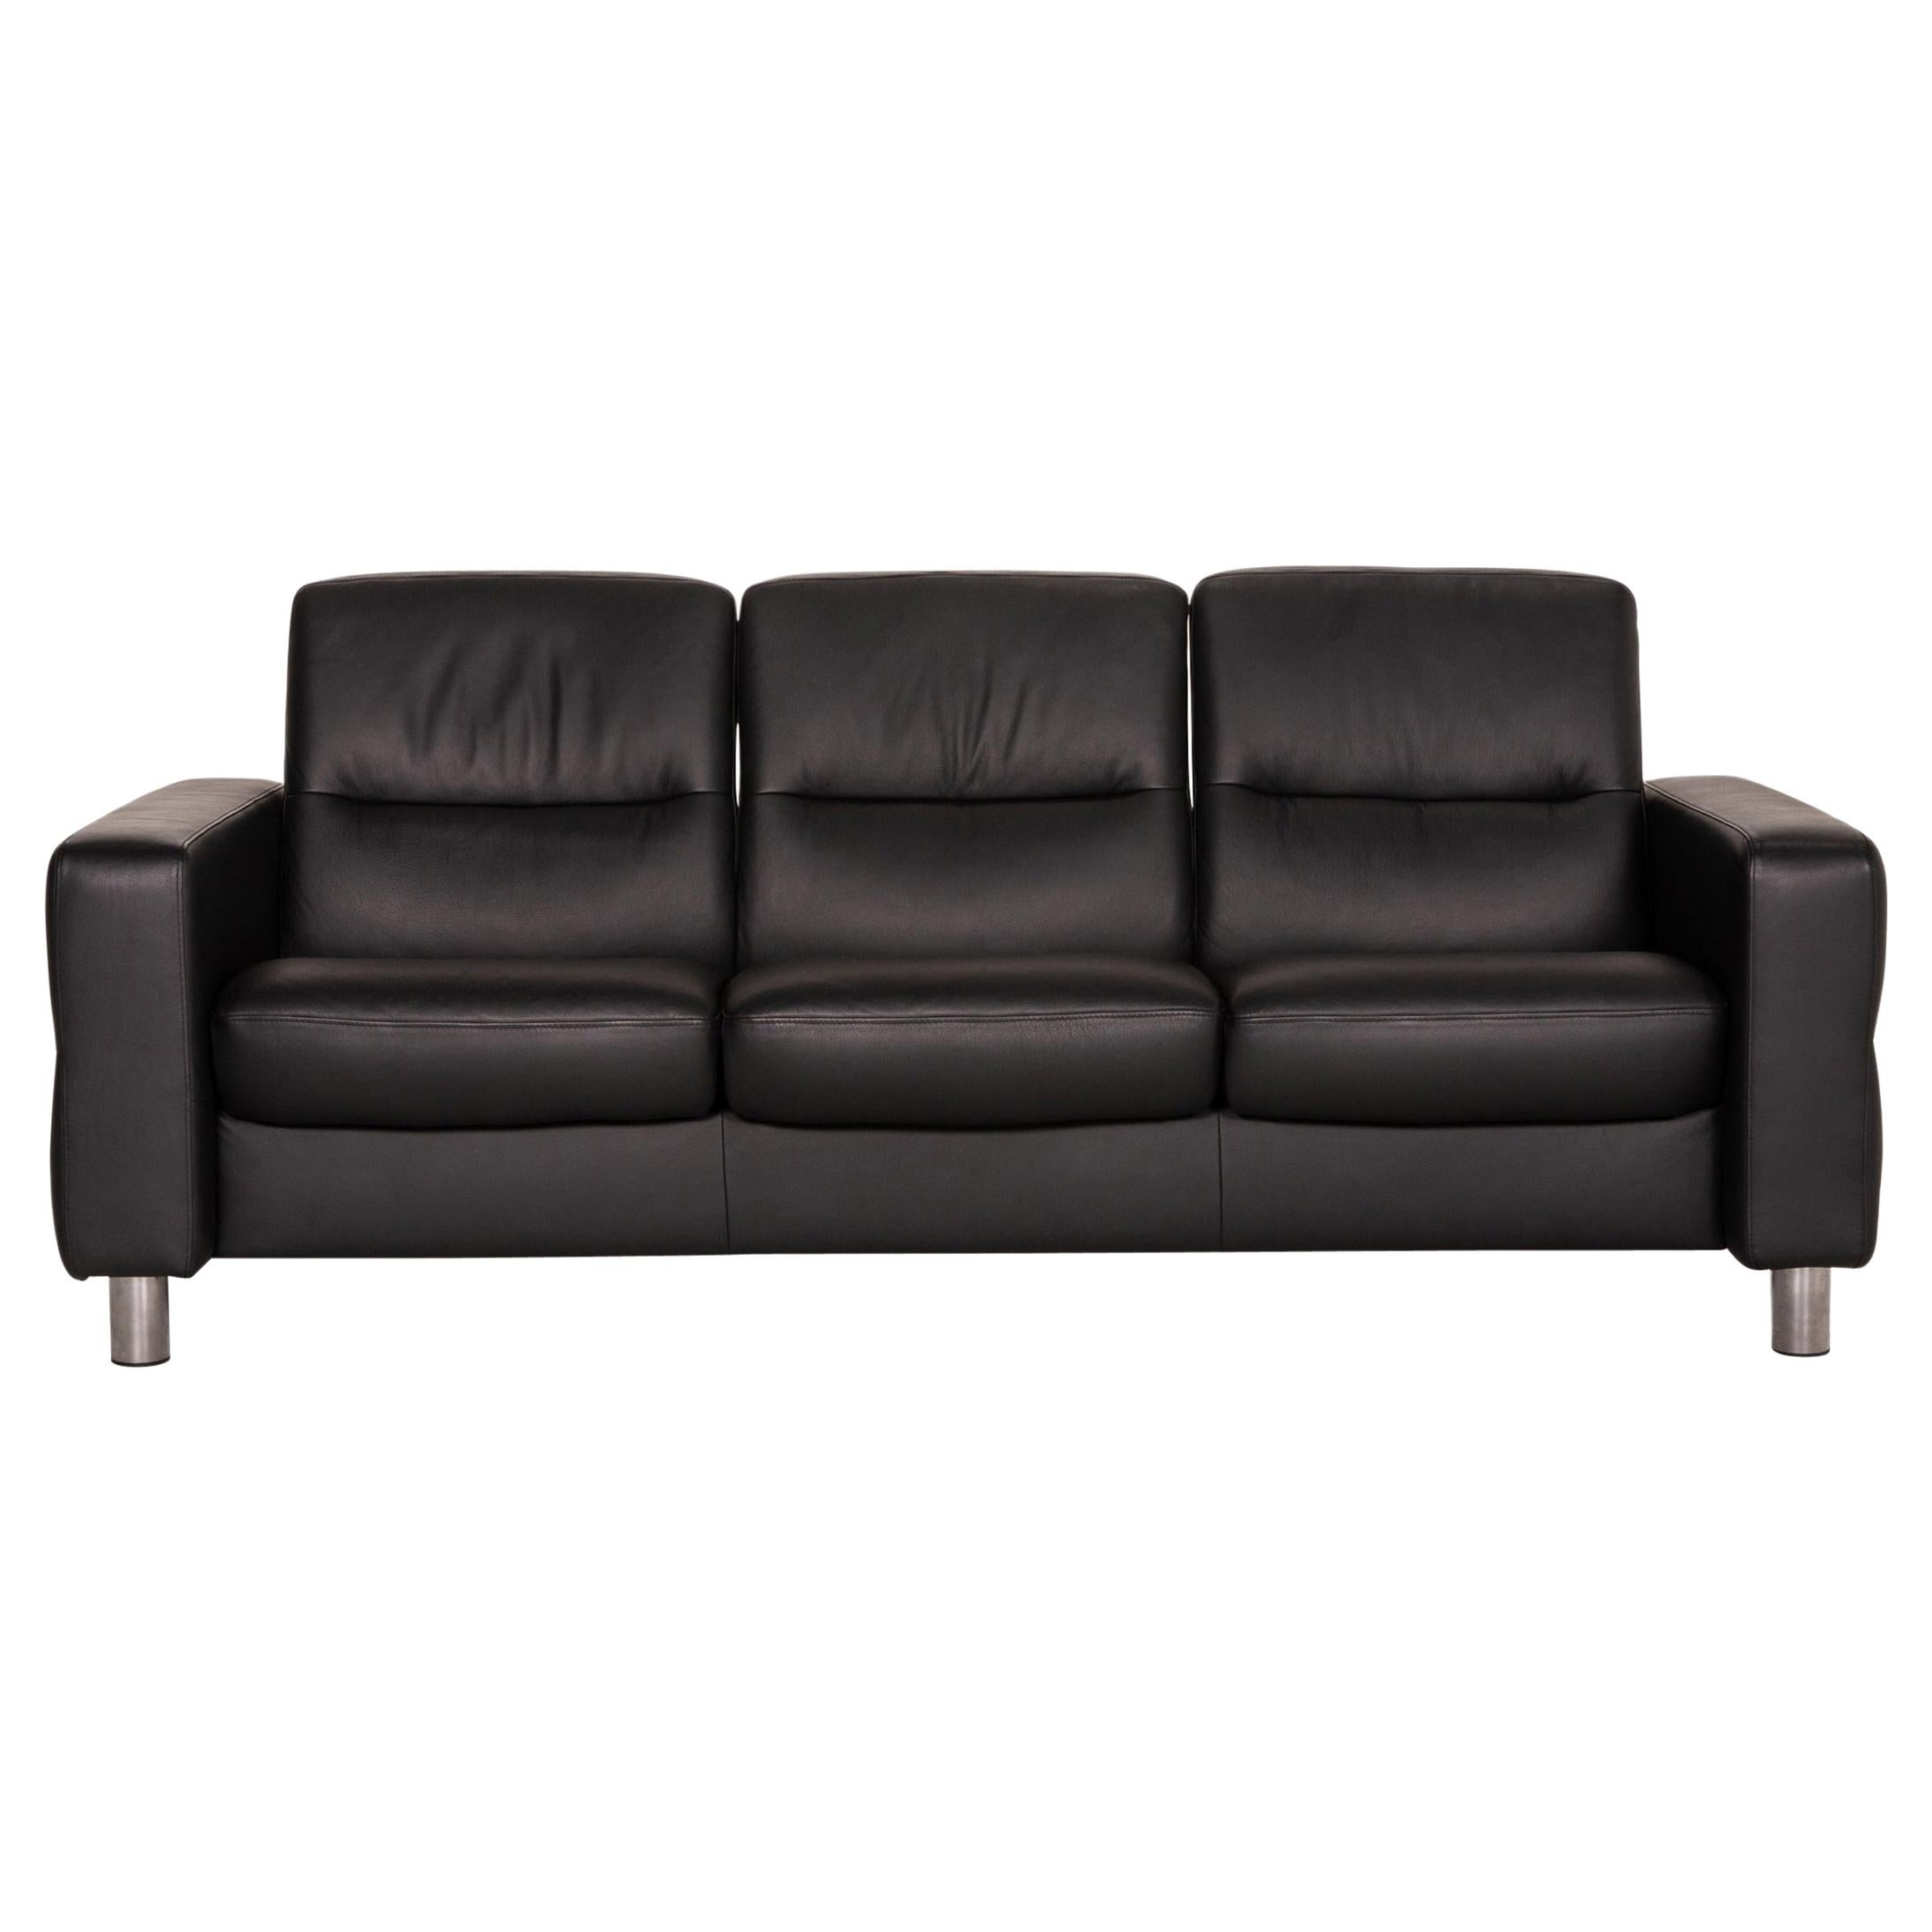 Stressless Waver Three Seater Leather Sofa Black Couch